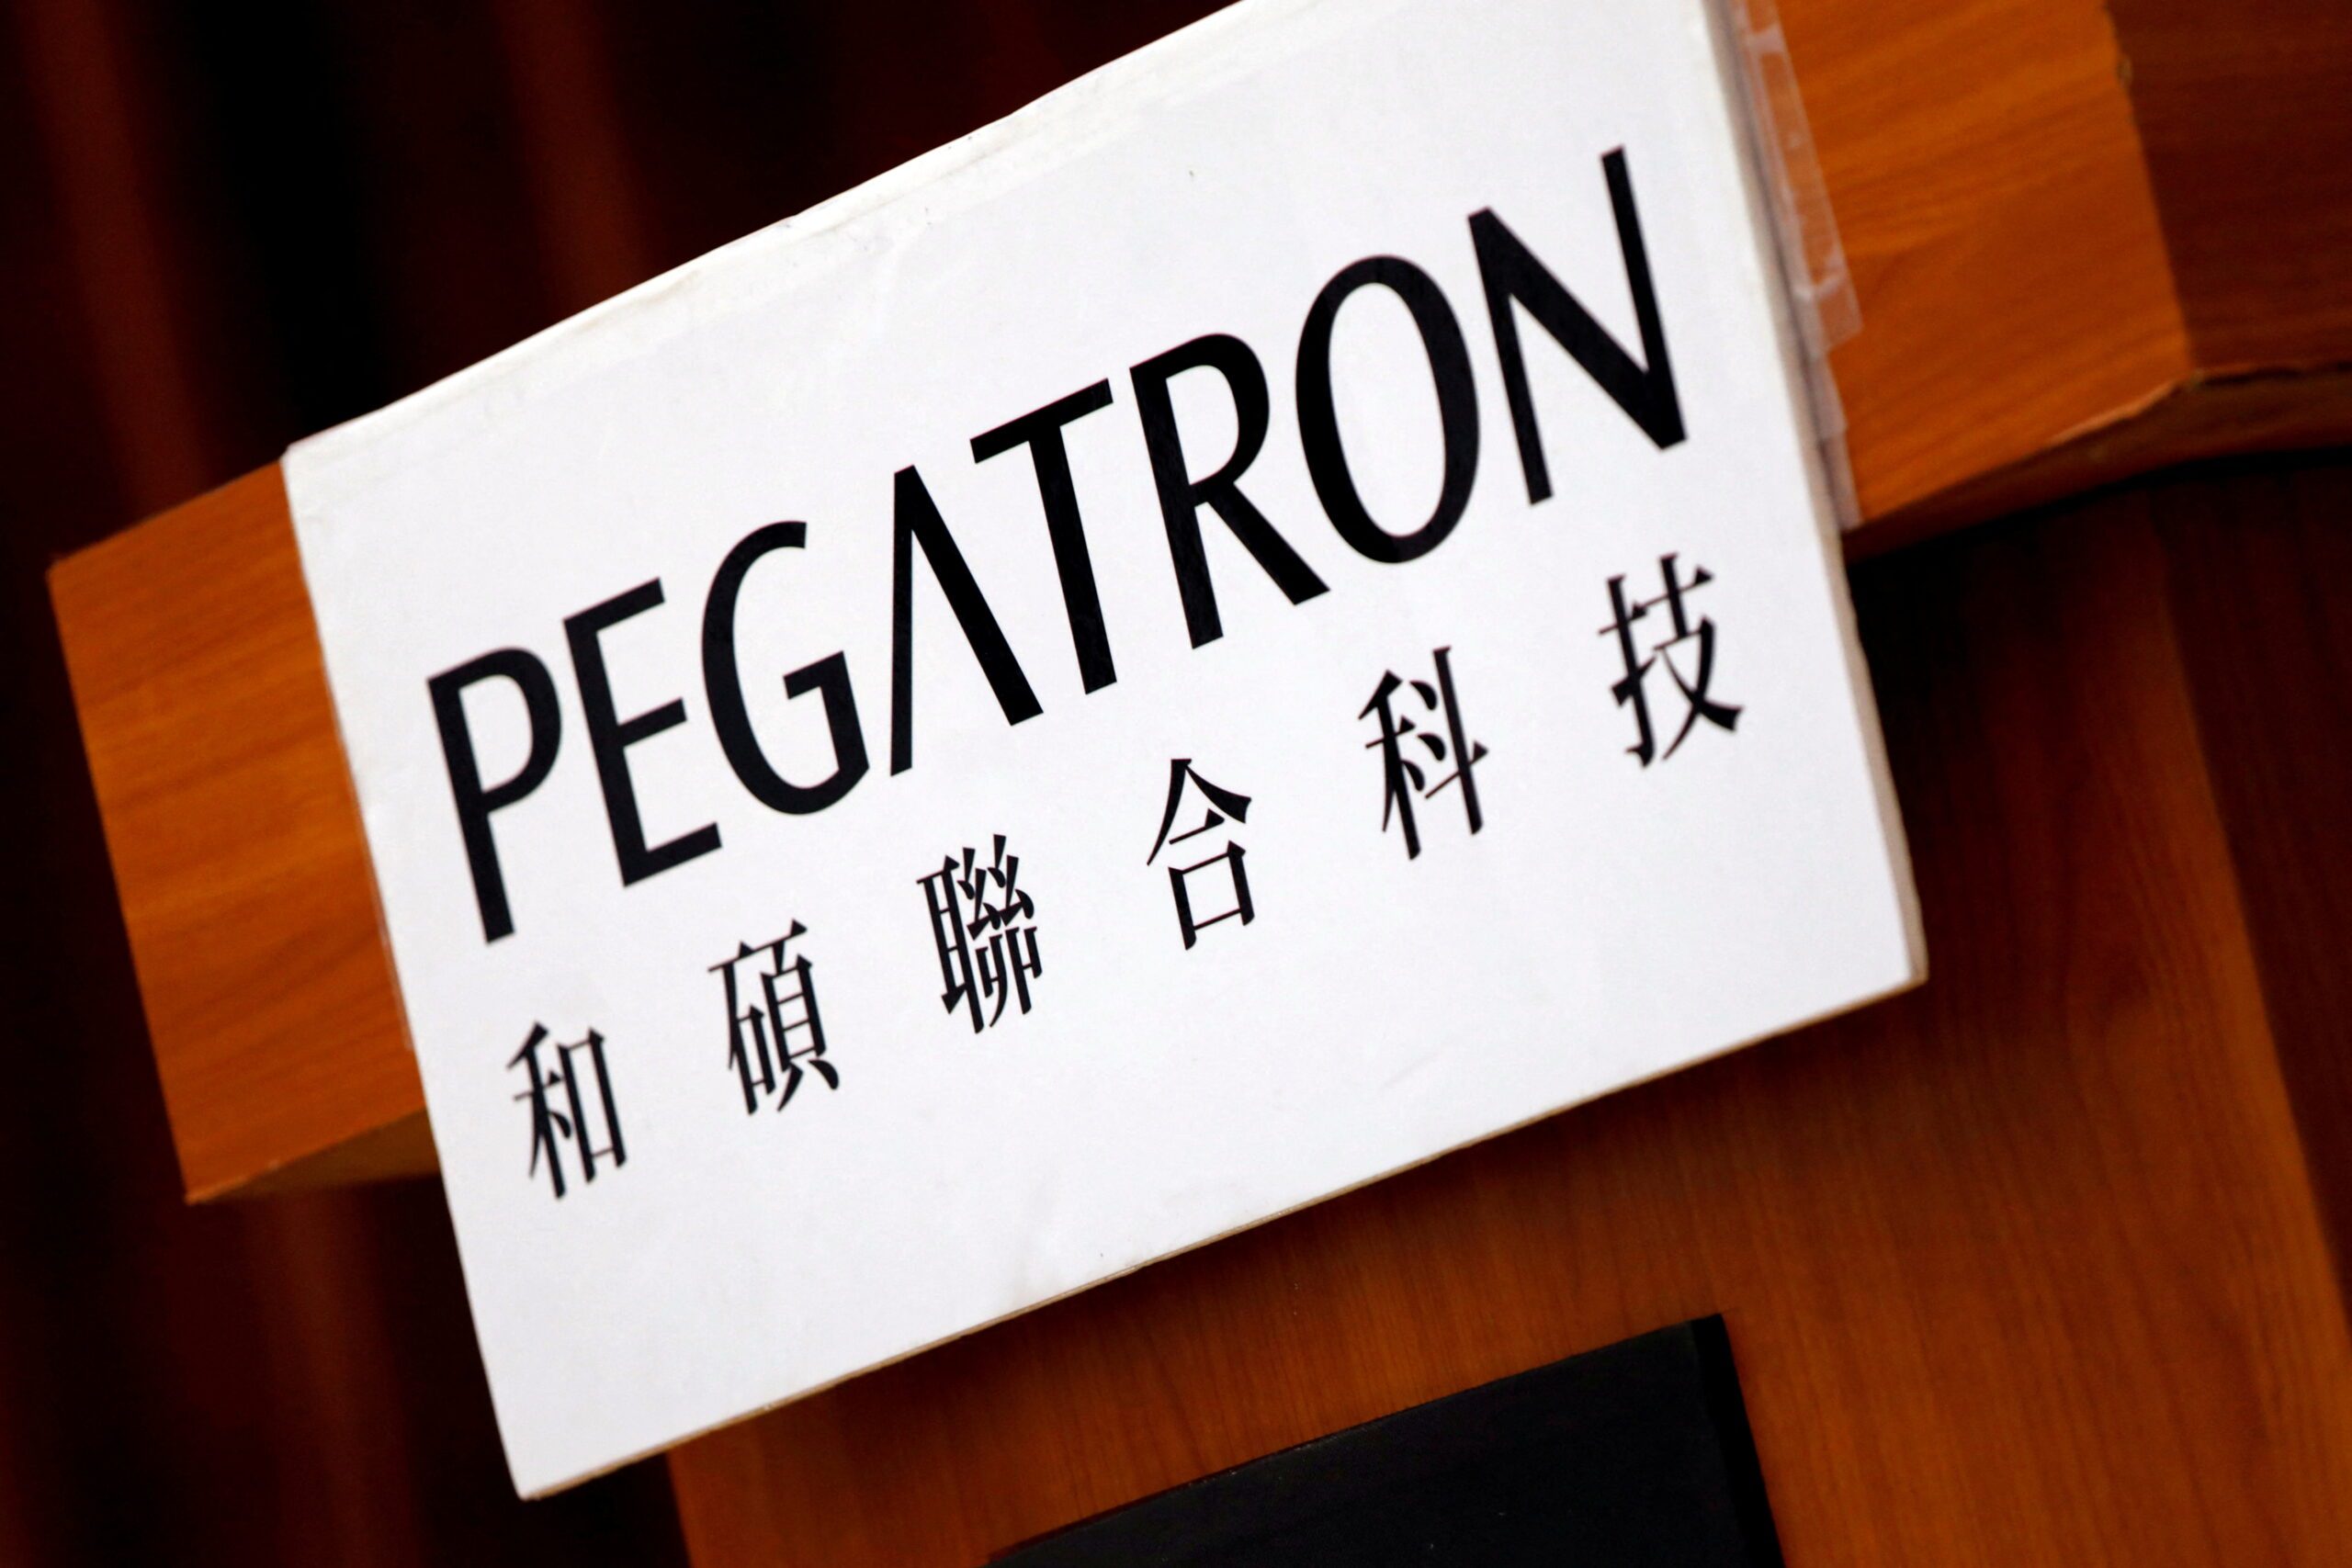 Taiwan iPhone maker Pegatron suspends operations at two China plants